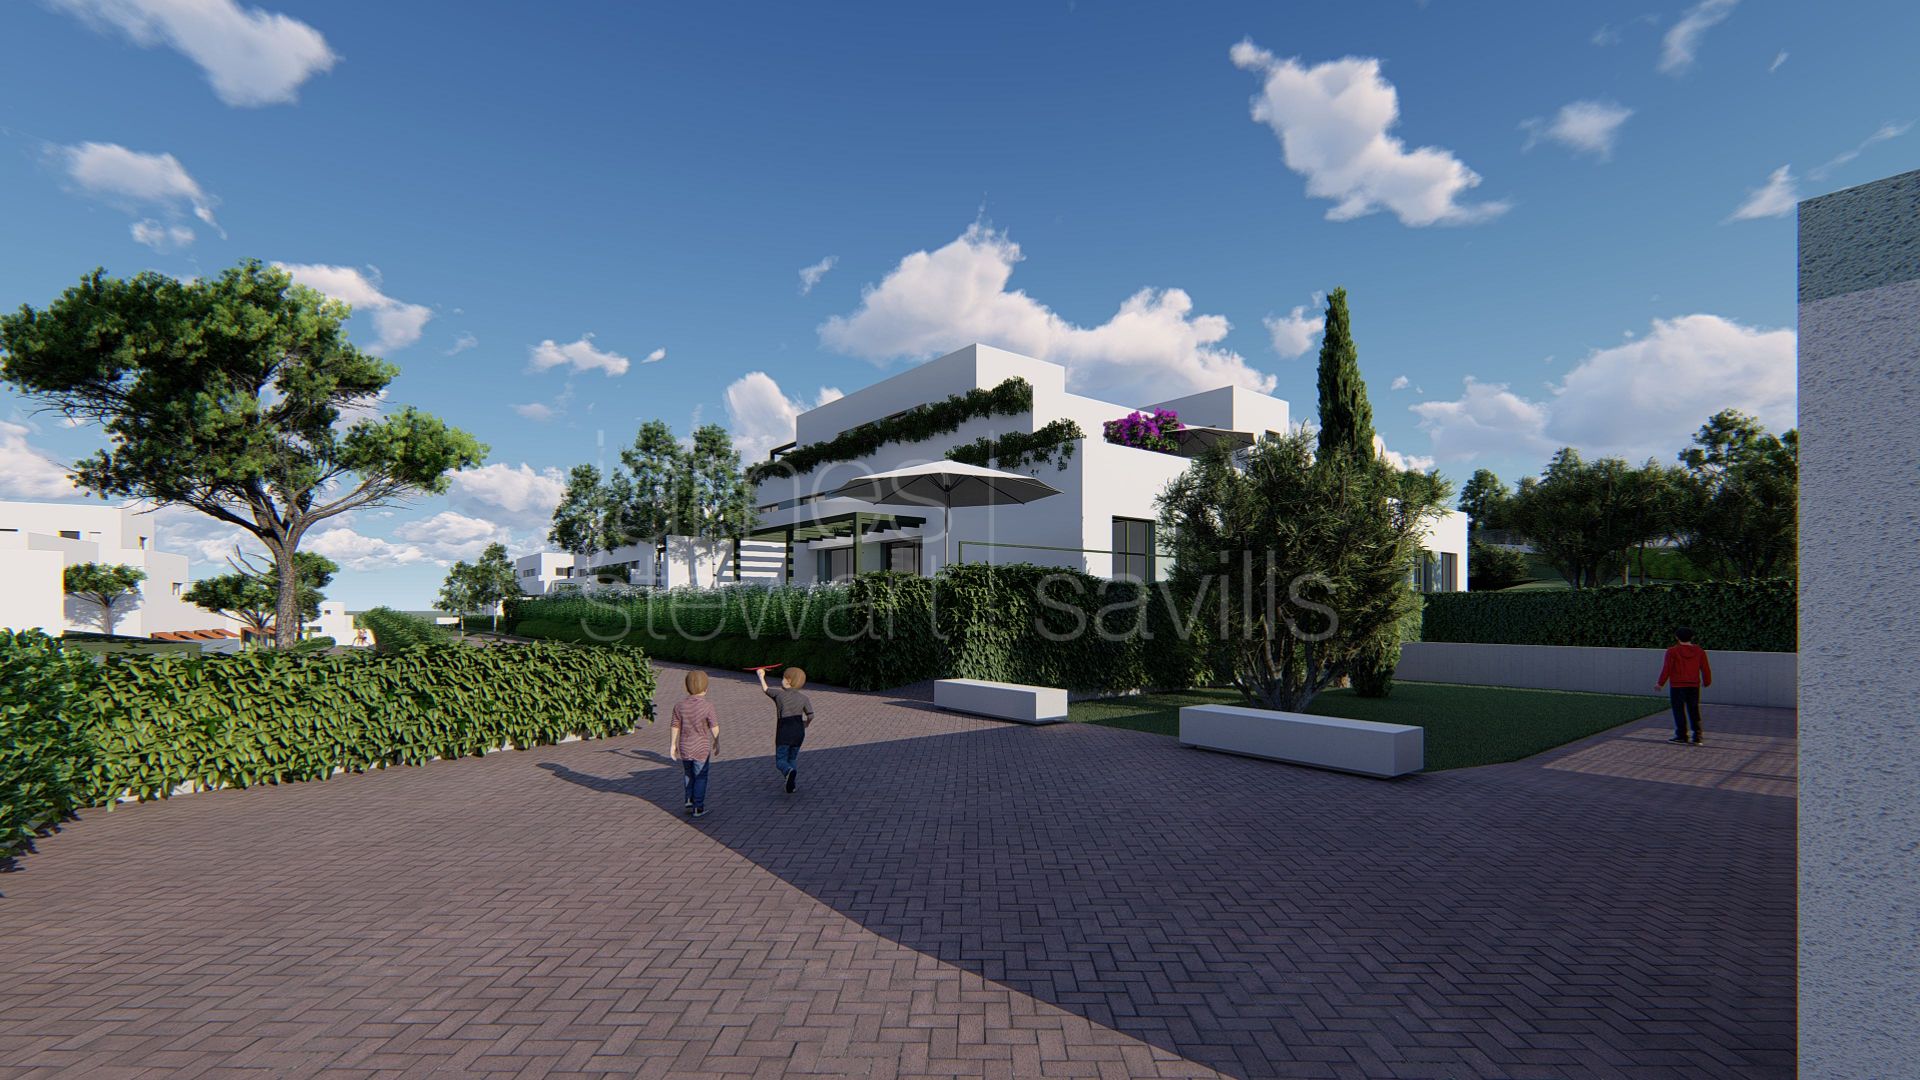 SENDA CHICA - a new contemporary gated community under construction within Sotogrande € 404,000 plus VAT